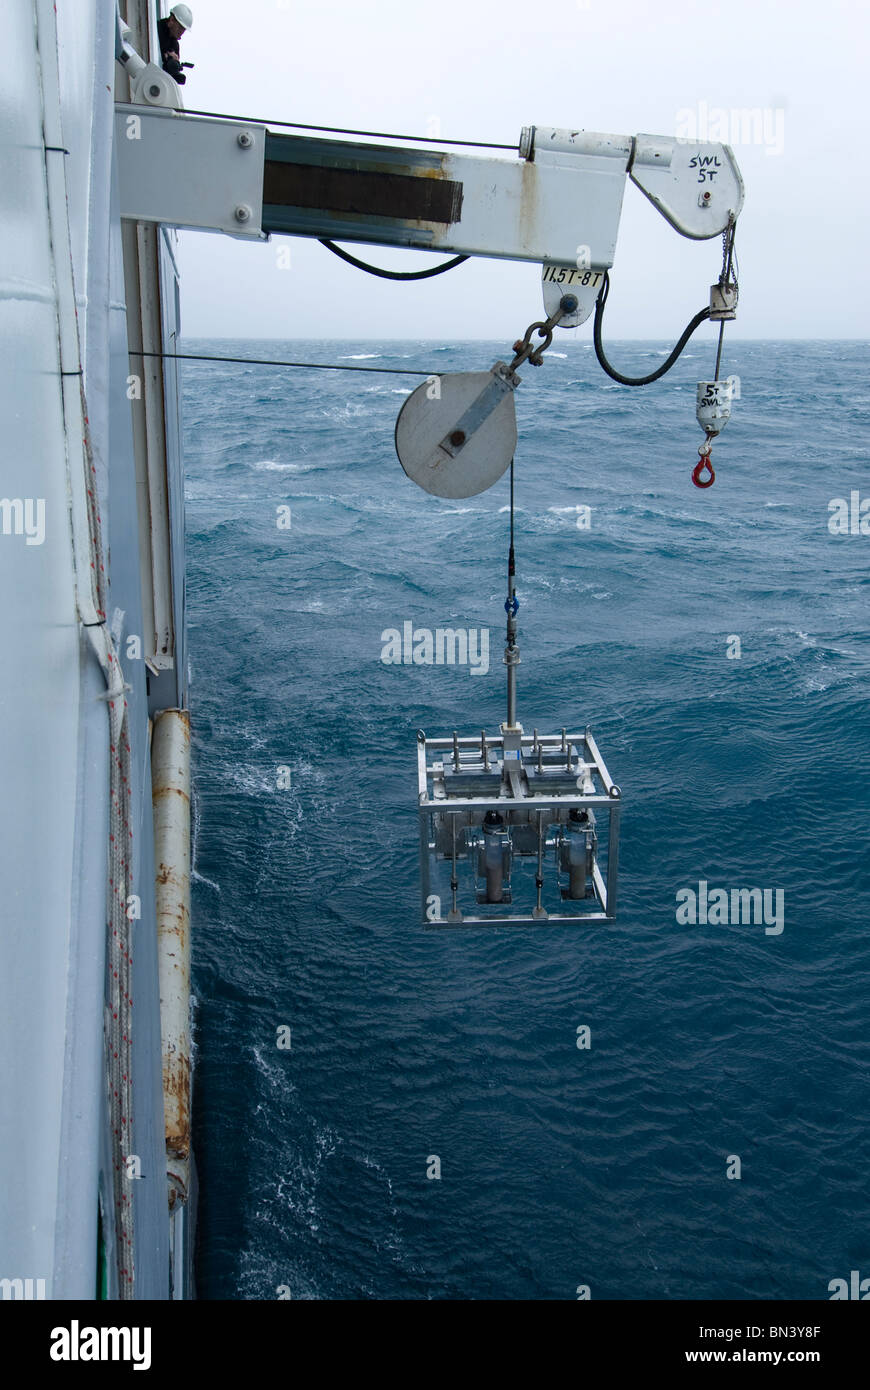 Core sampler lifted from sea, South Atlantic Ocean Stock Photo